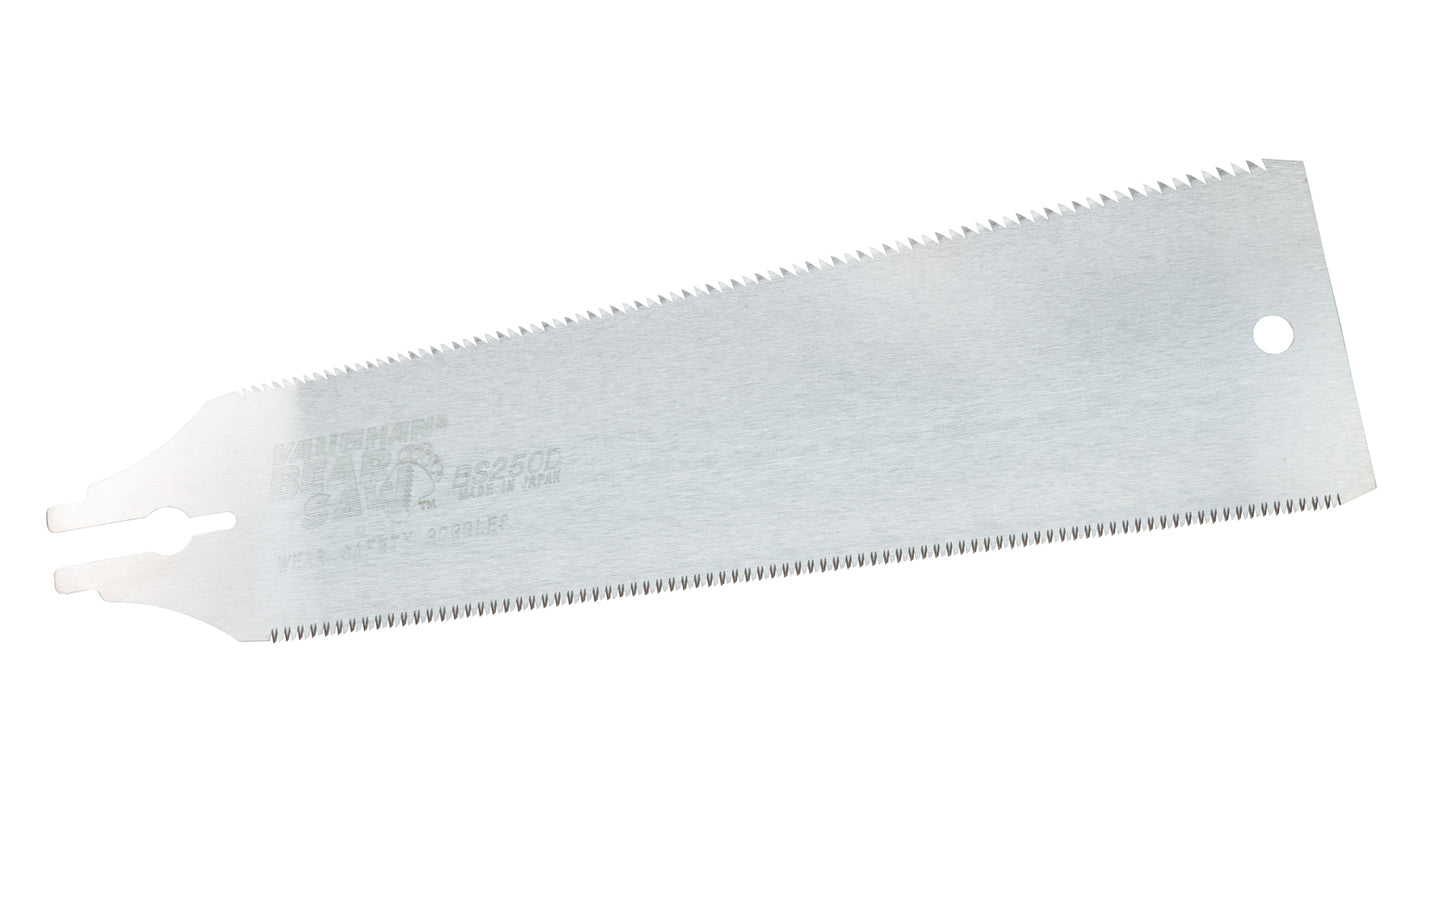 Made in Japan · Vaughan 250RBD ~ Crosscut Teeth: 18 TPI ~ Rip Teeth: 10 TPI ~ Impulse Hardened Teeth ~ Replacement Blade ~ "Ryoba Nokogiri" is a special double-sided Japanese pull-saw ~ Excellent for multi-purpose use - Good for Trimming - Cutting dovetails - Double Blade - Vaughan "Bear Saw" 250 mm replacement blade - 051218569322 